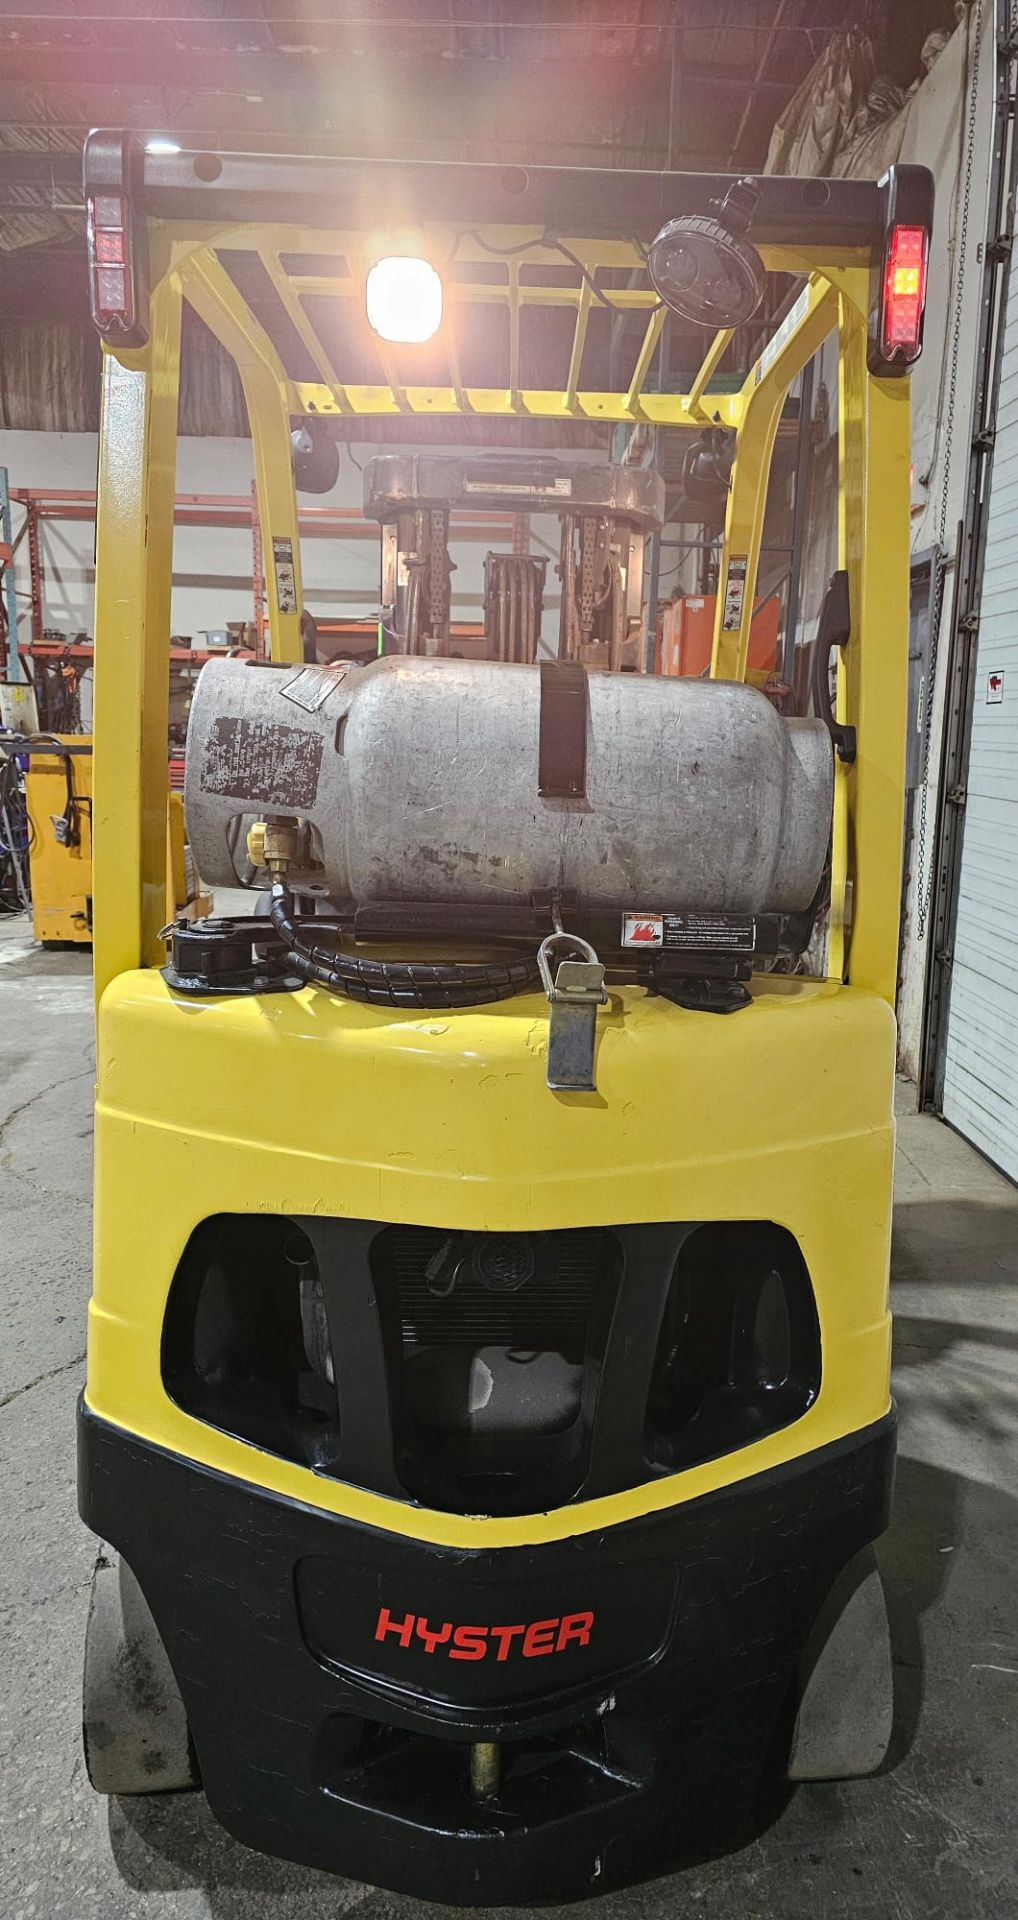 2019 Hyster 4,000lbs Capacity LPG (Propane) Forklift with sideshift 3-Stage Mast(no propane tank - Image 3 of 5